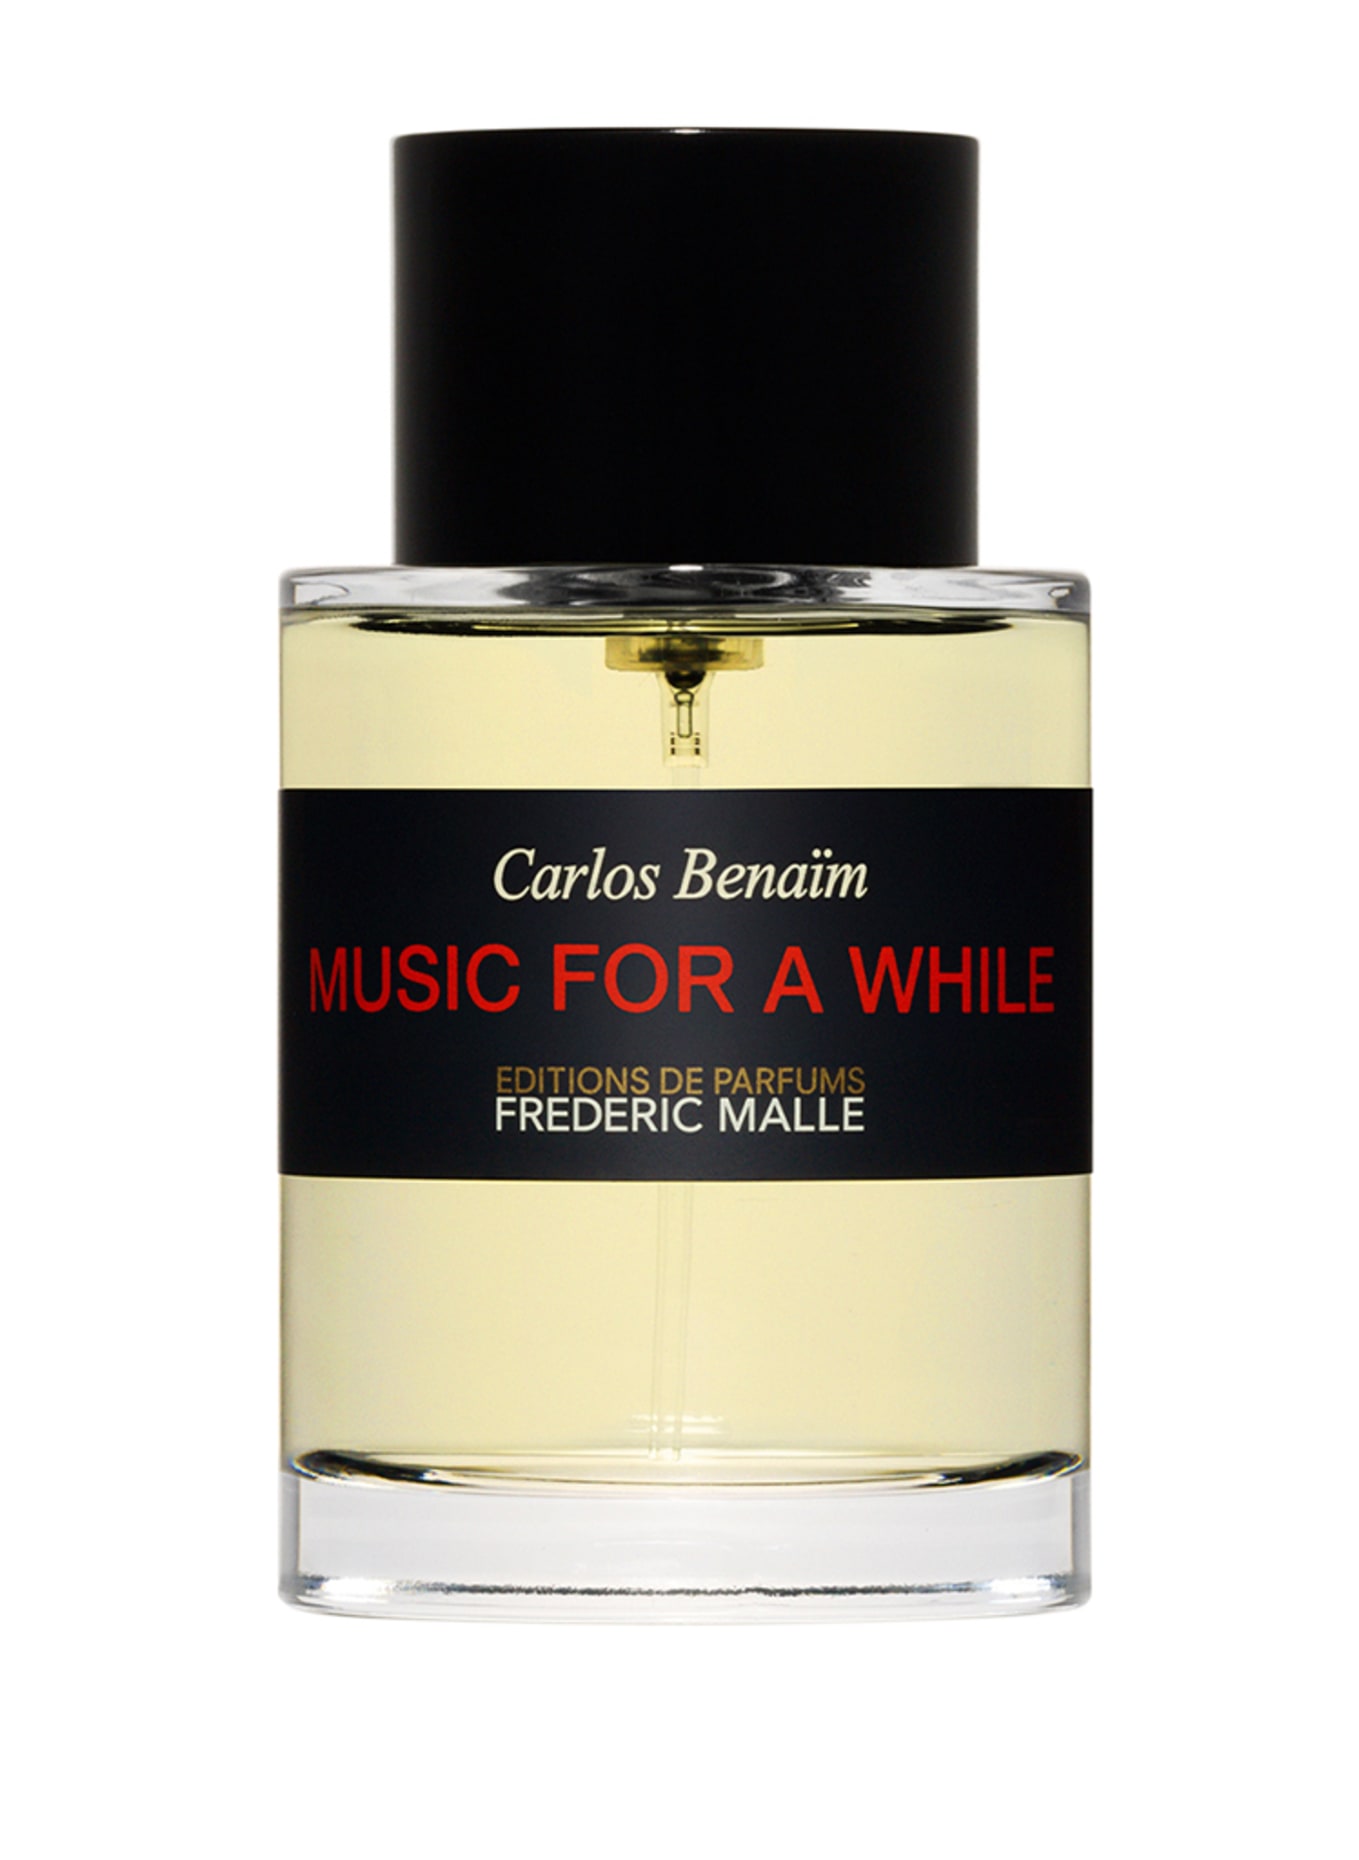 EDITIONS DE PARFUMS FREDERIC MALLE MUSIC FOR A WHILE (Obrázek 1)